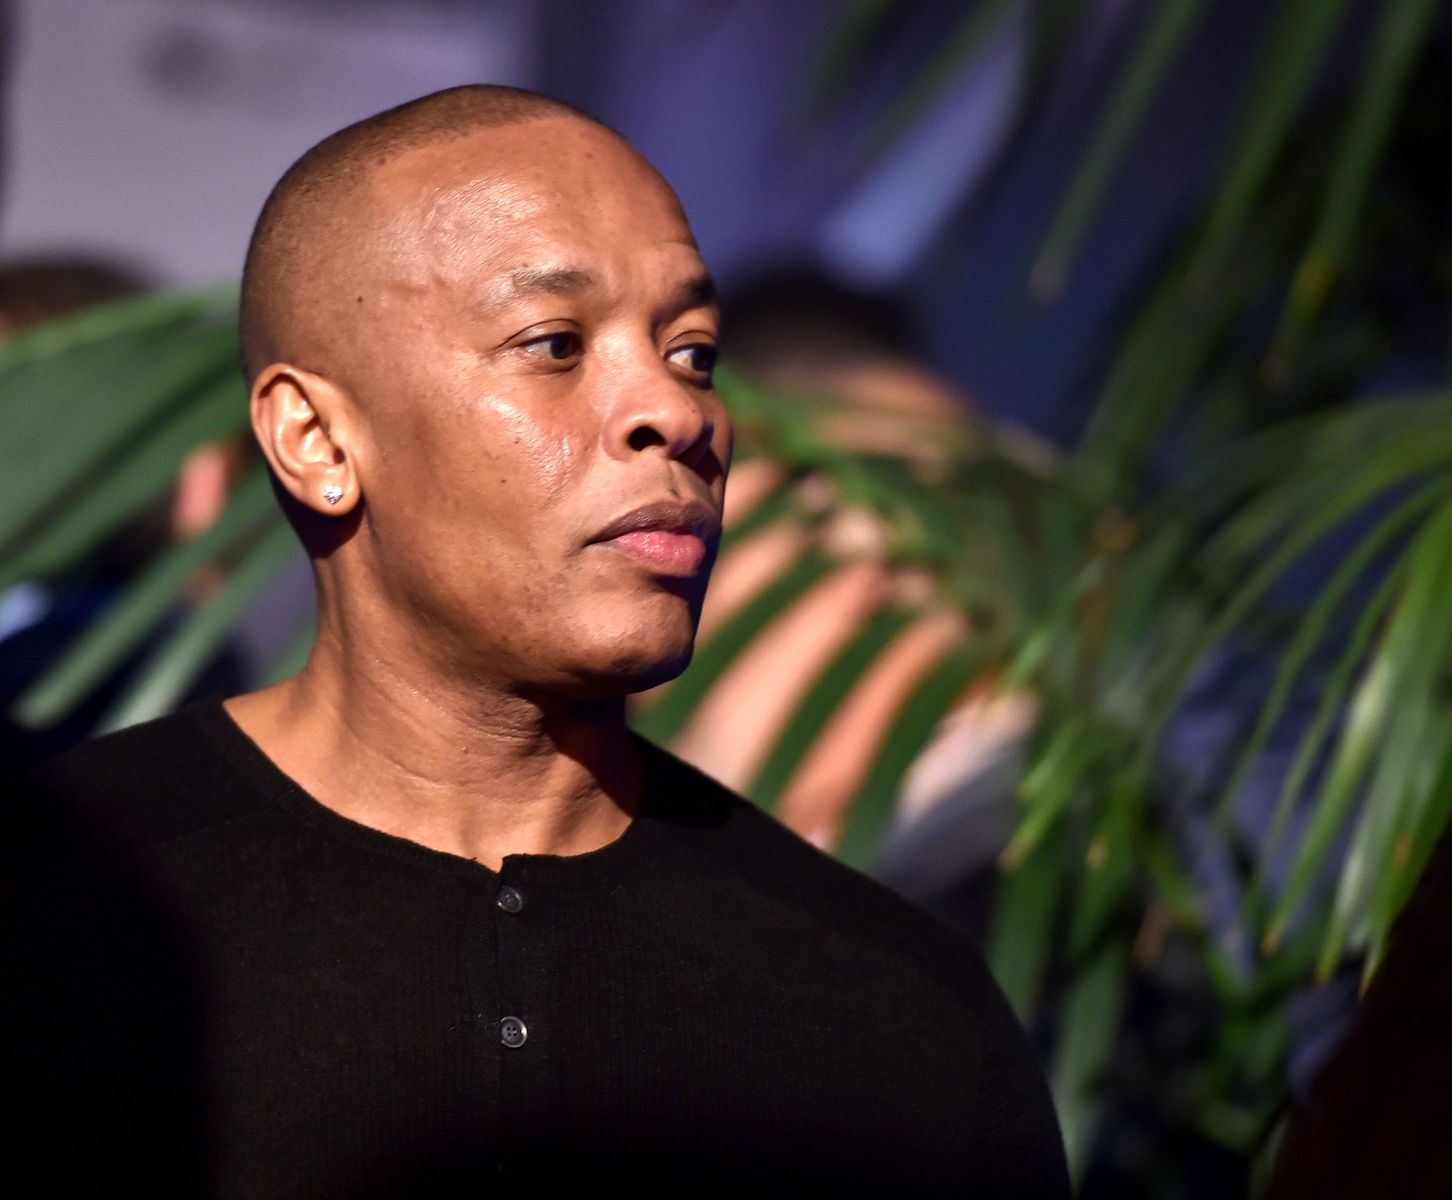 Beats Electronics founder Dr. Dre at the after-party for the premiere of "Straight Outta Compton" on August 10, 2015. | Photo: Getty Images